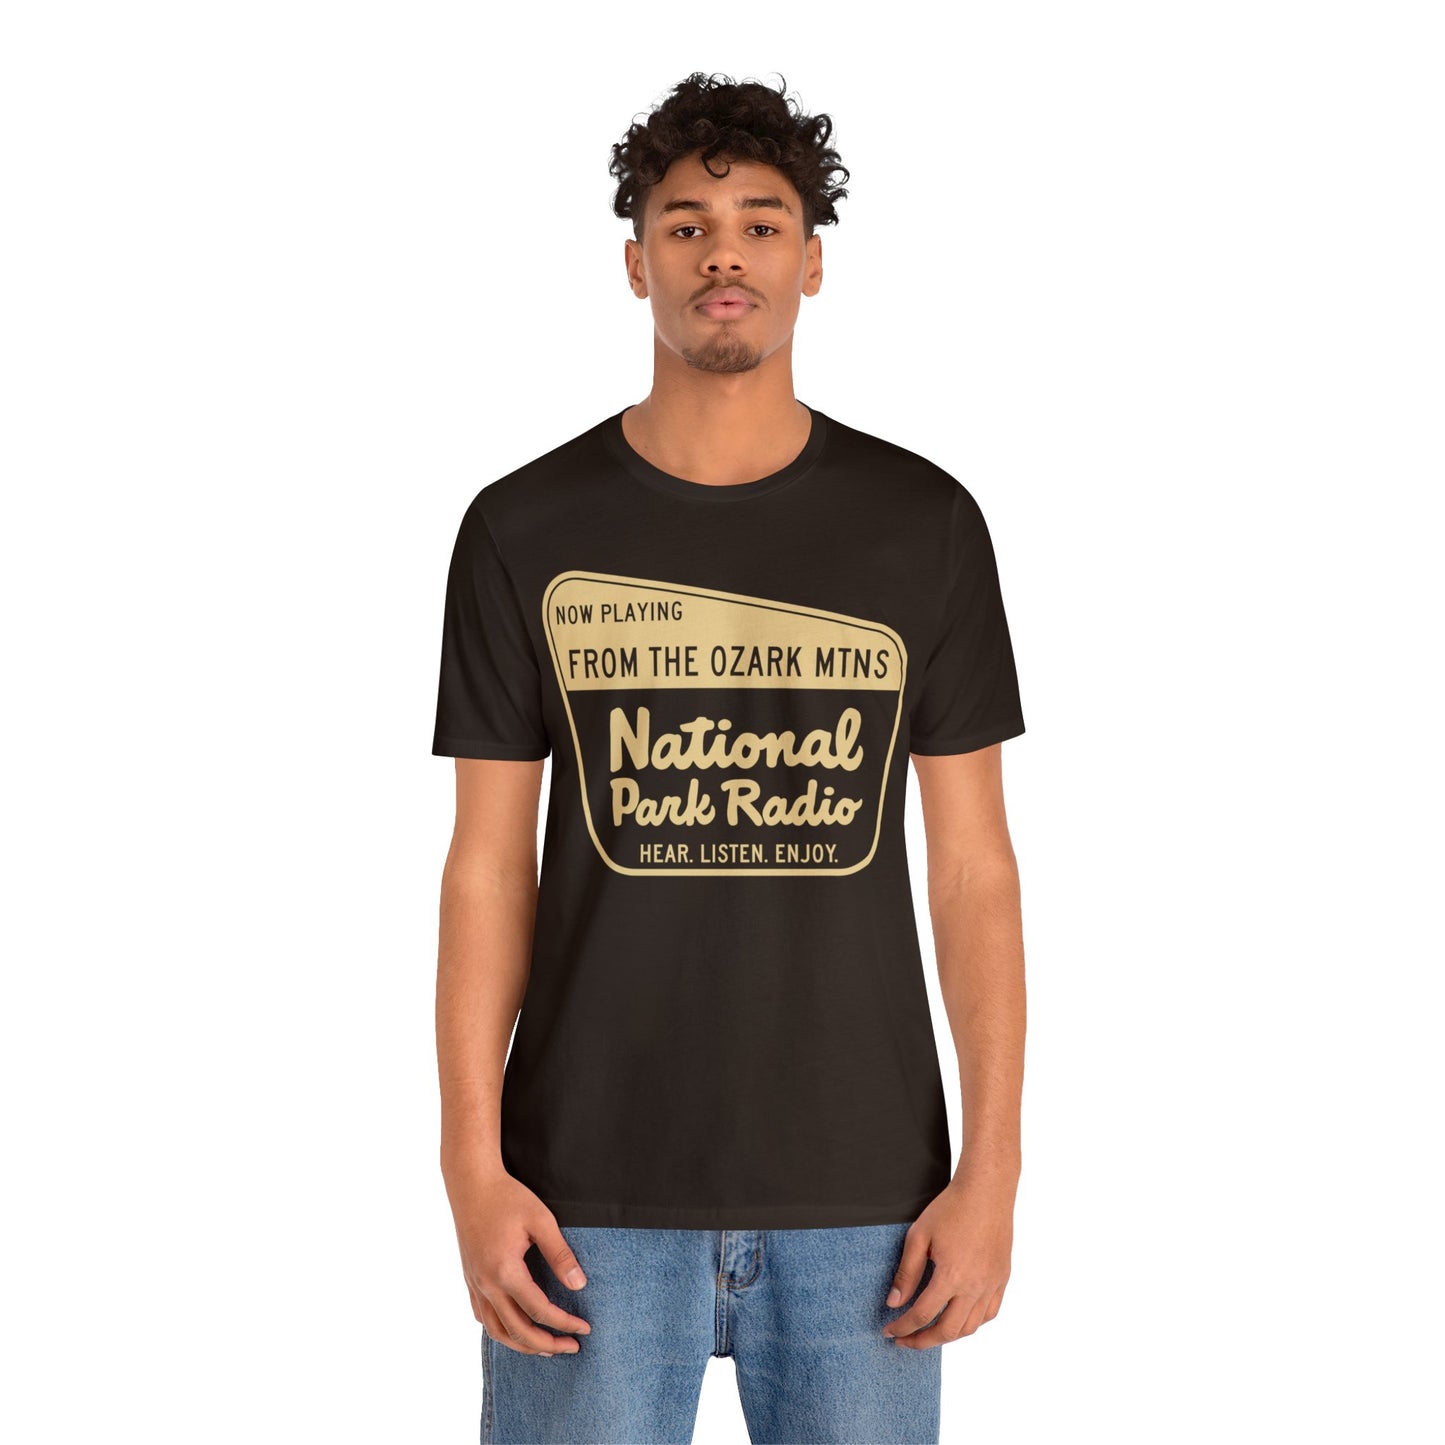 NPR National Forest Sign Tee